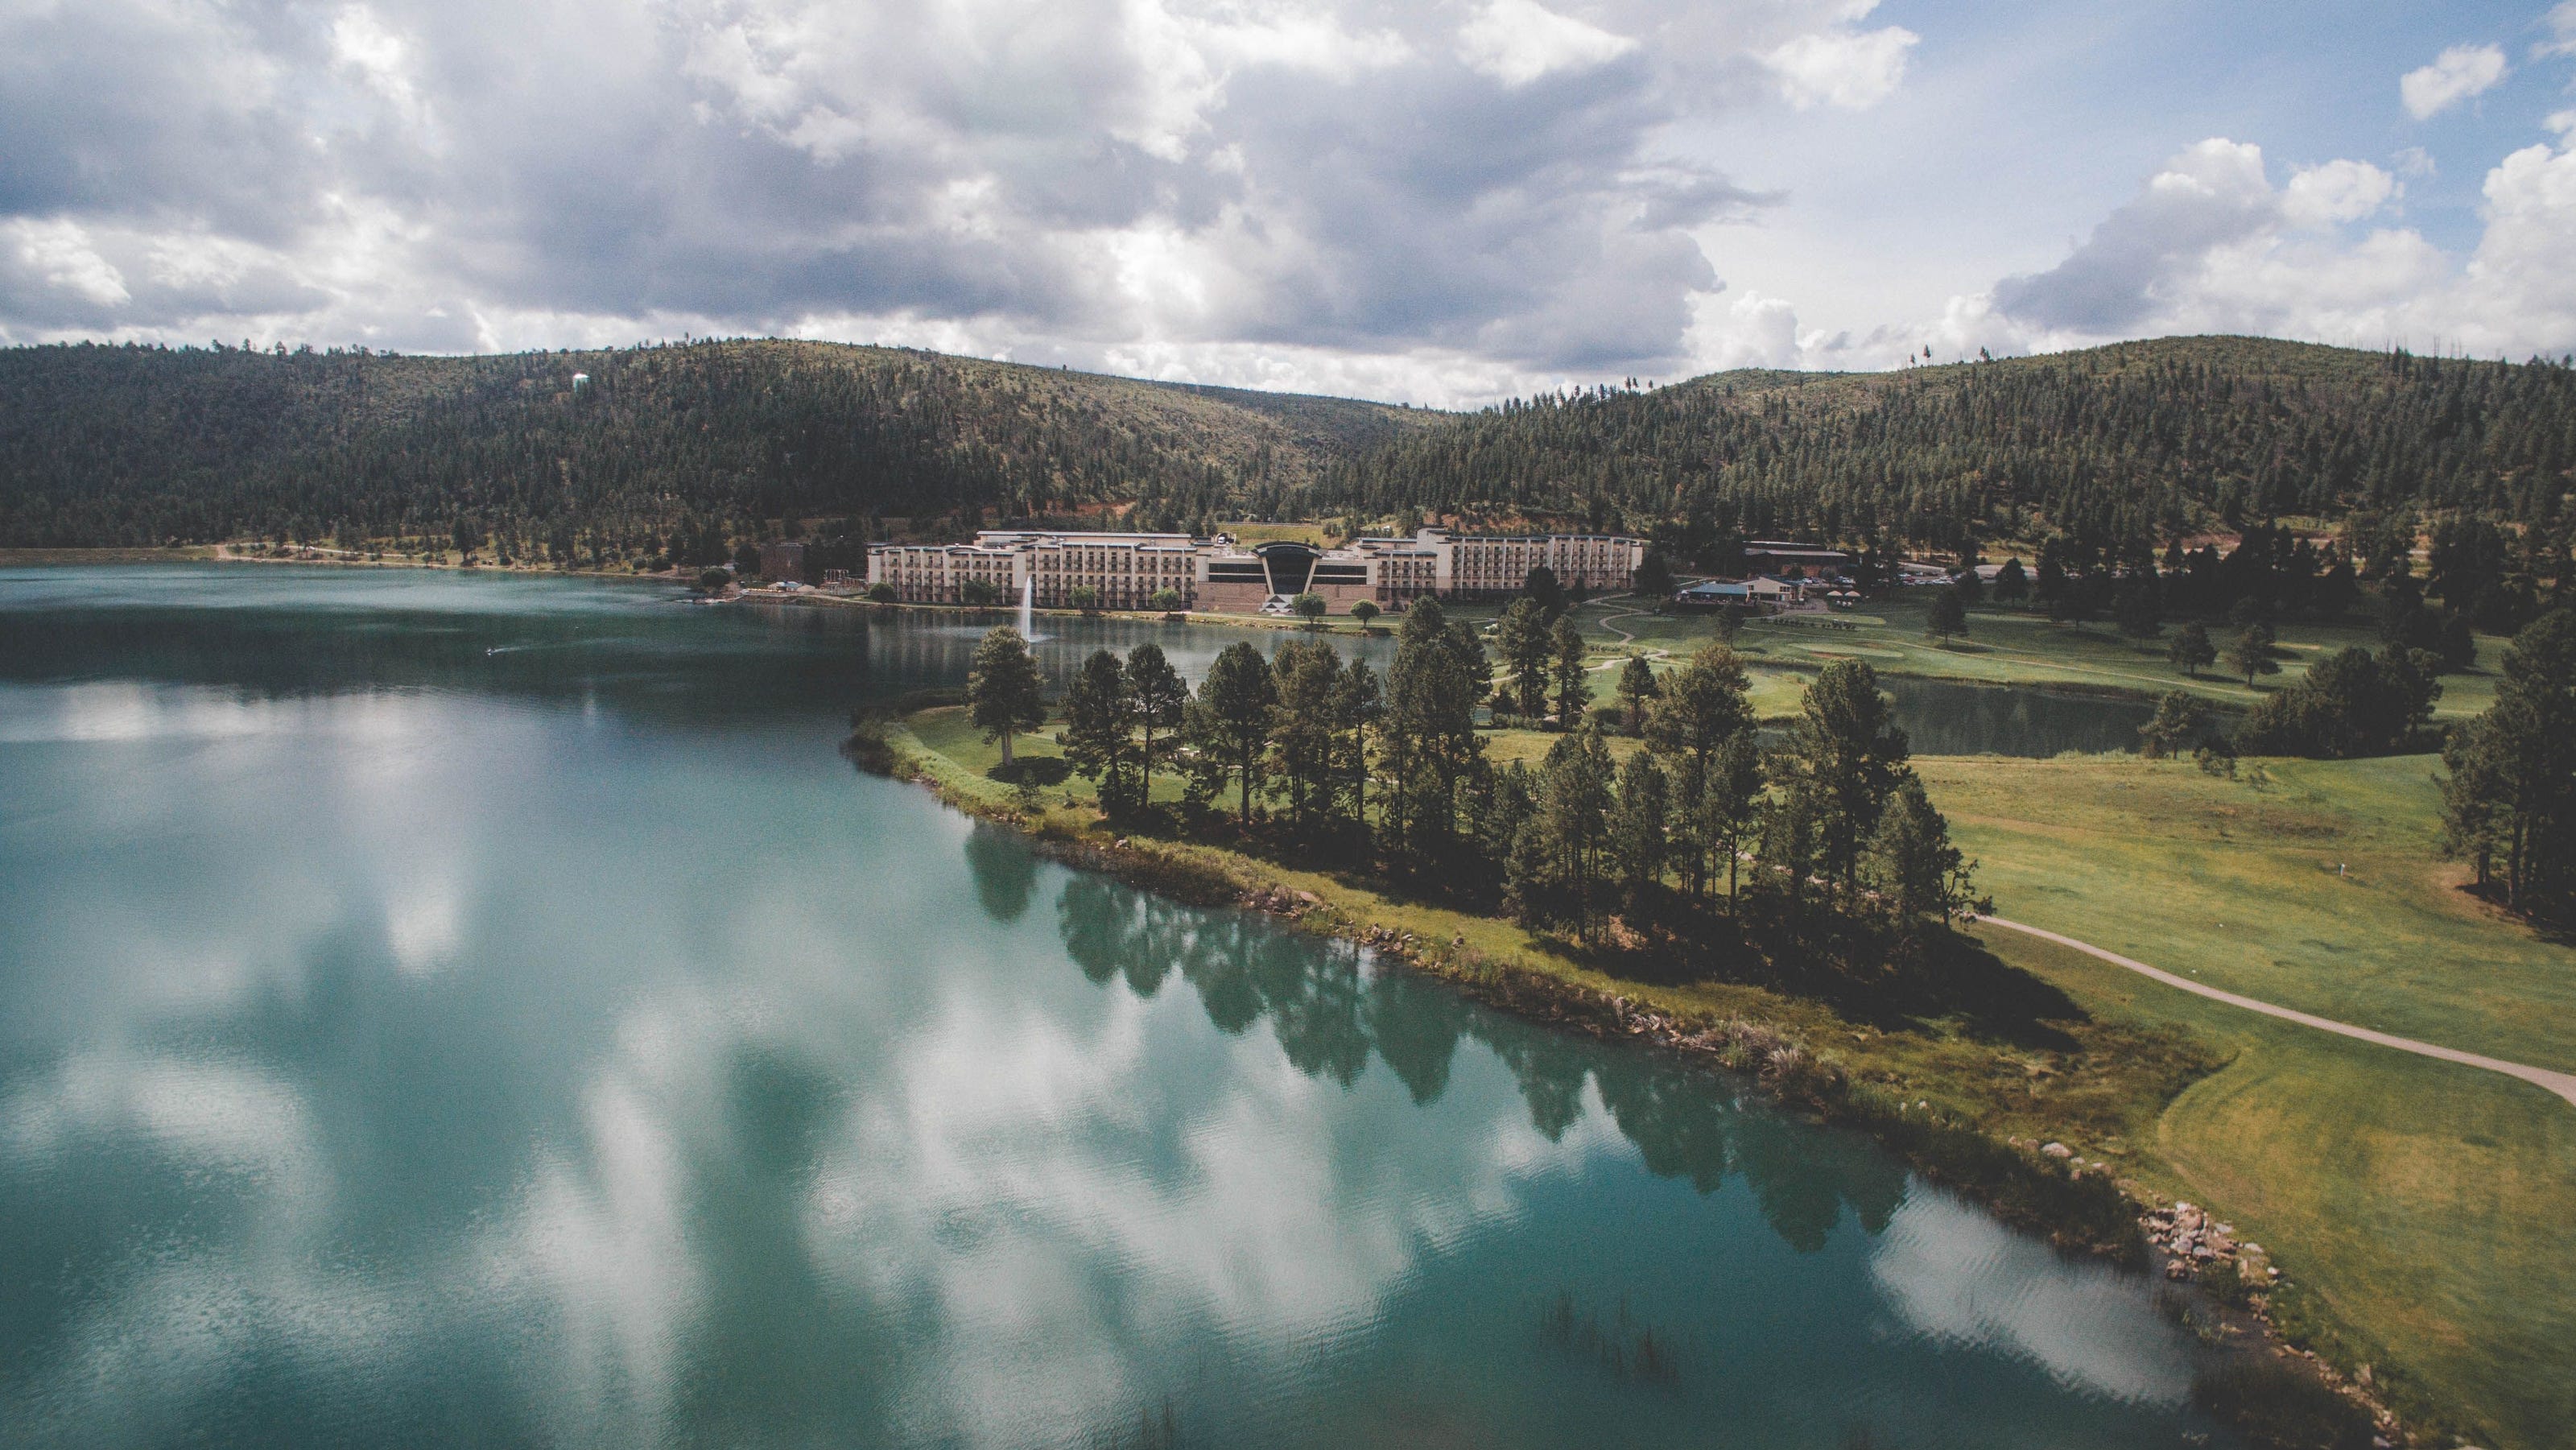 Inn of the Mountain Gods in Mescalero reopens Monday